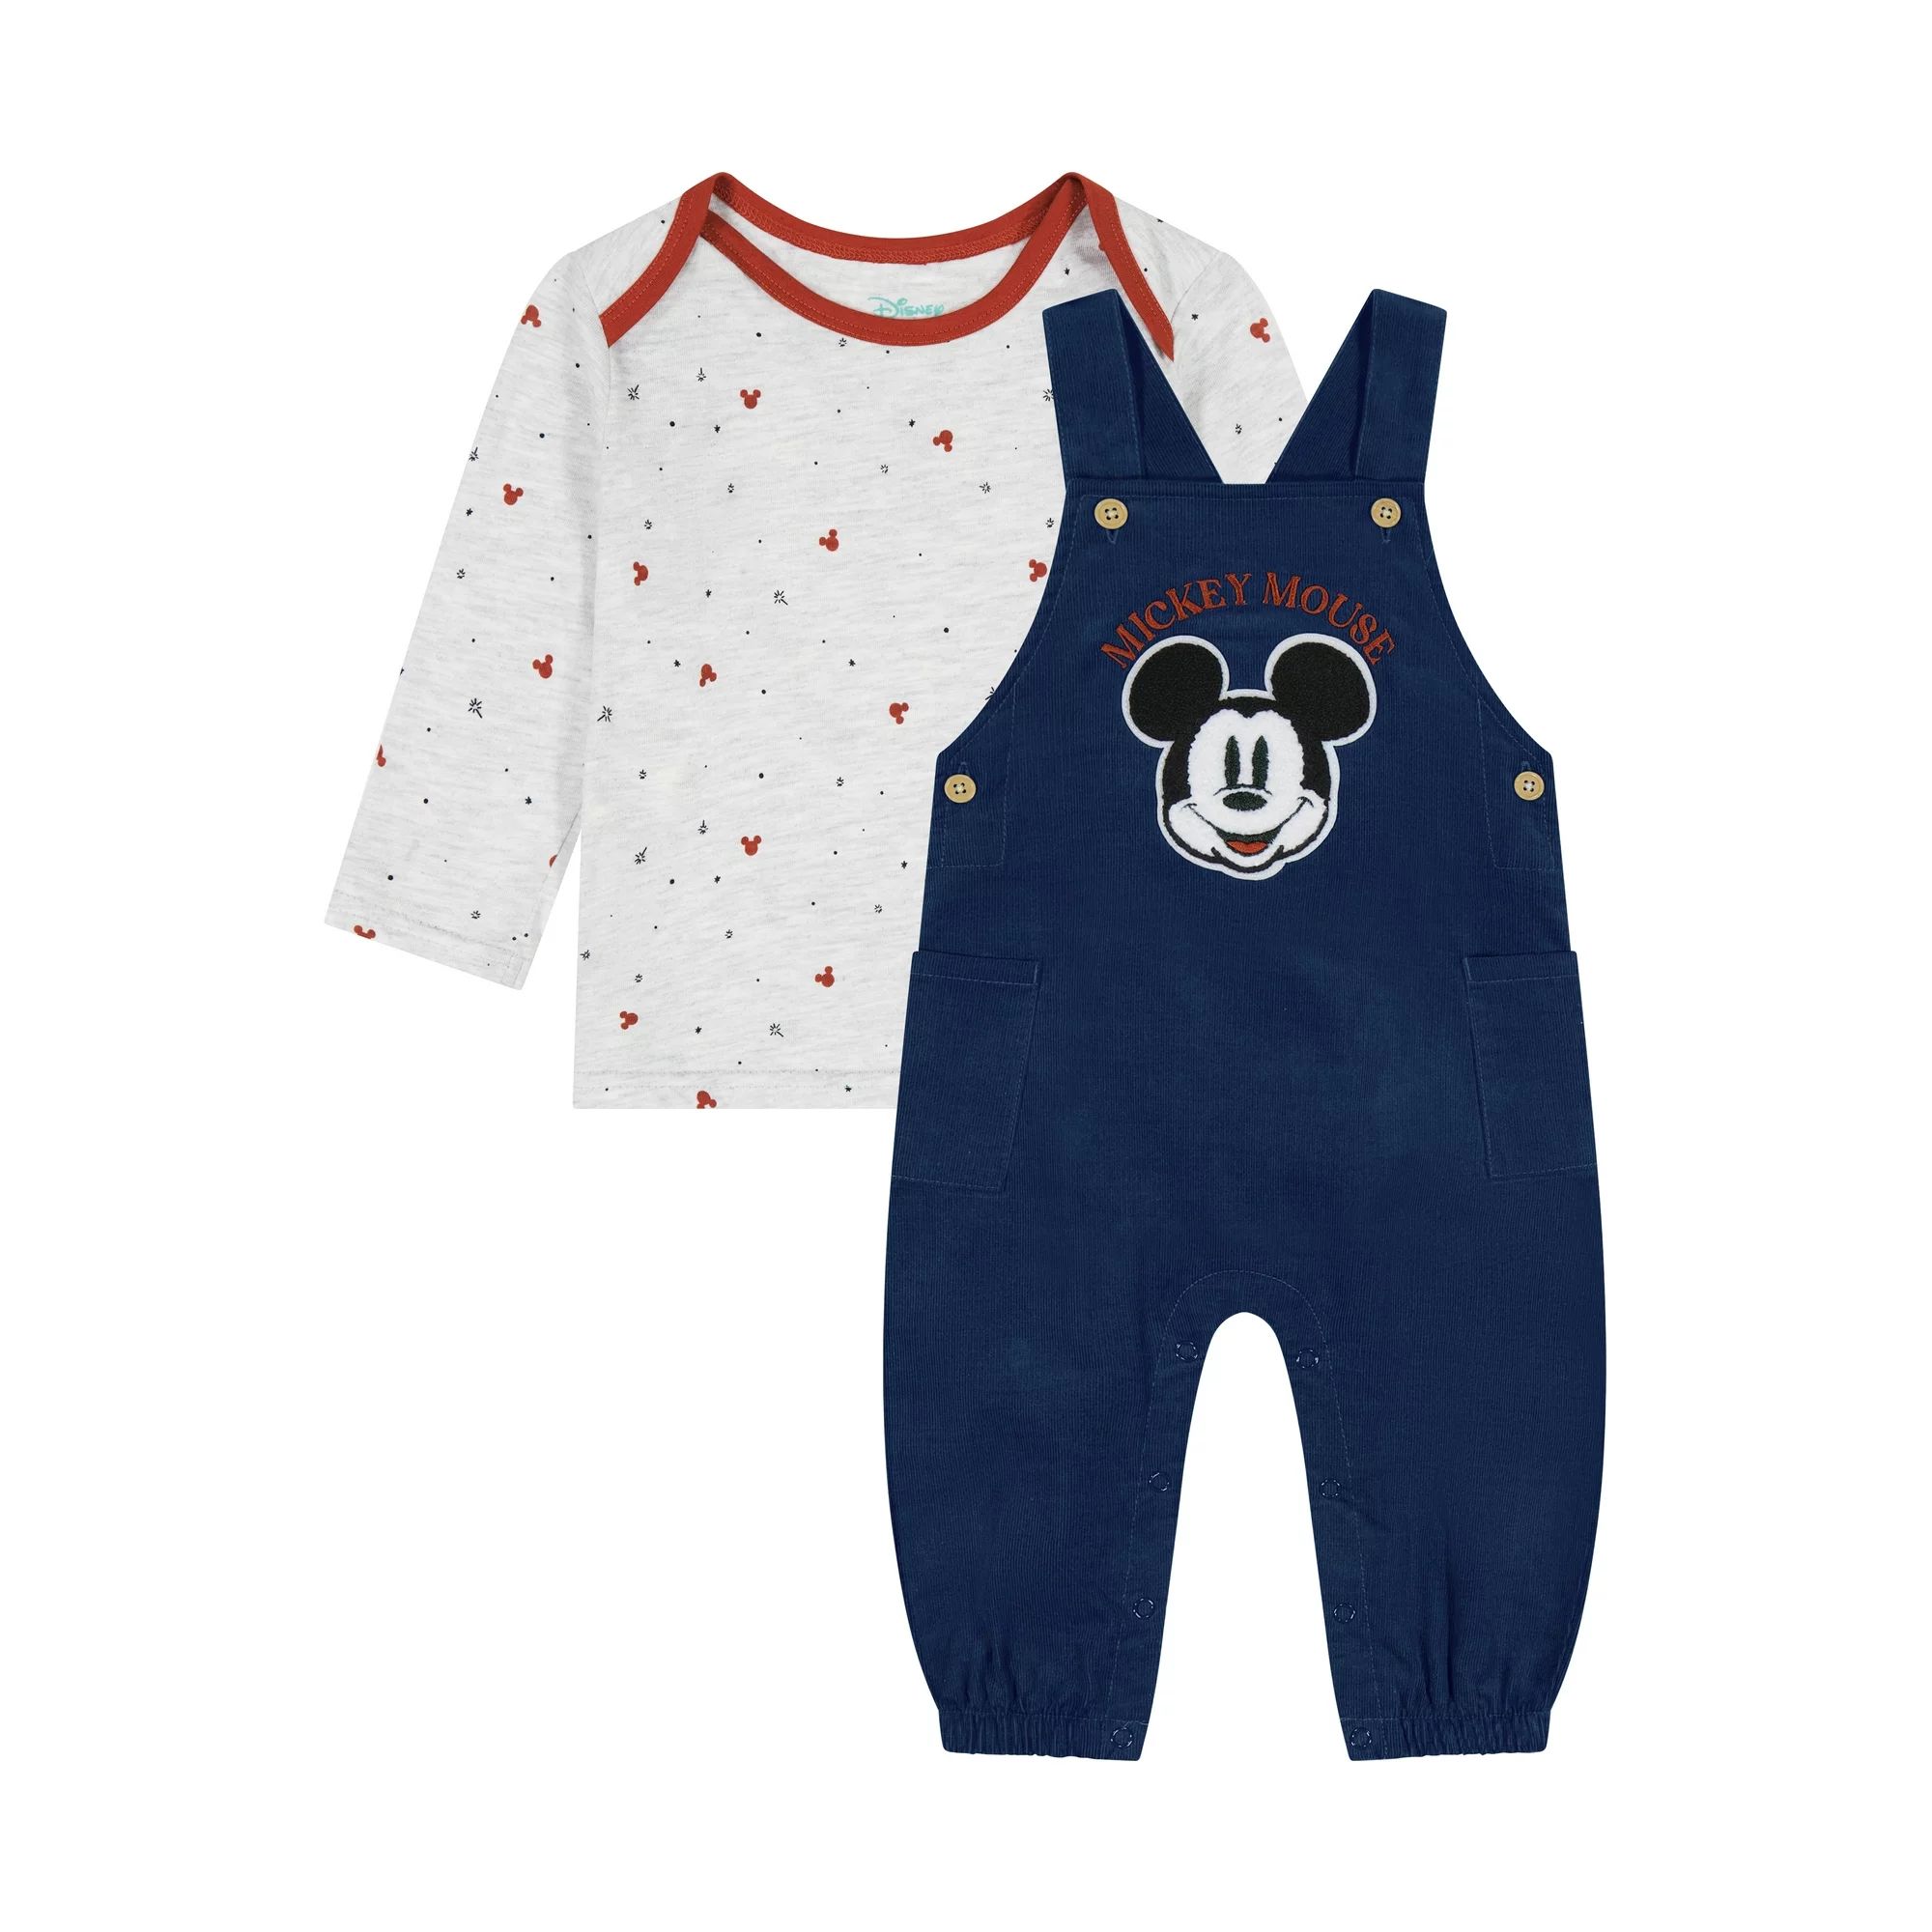 Mickey Mouse Baby Boy Overall Set, Sizes 0/3 Months - 24 Months | Walmart (US)